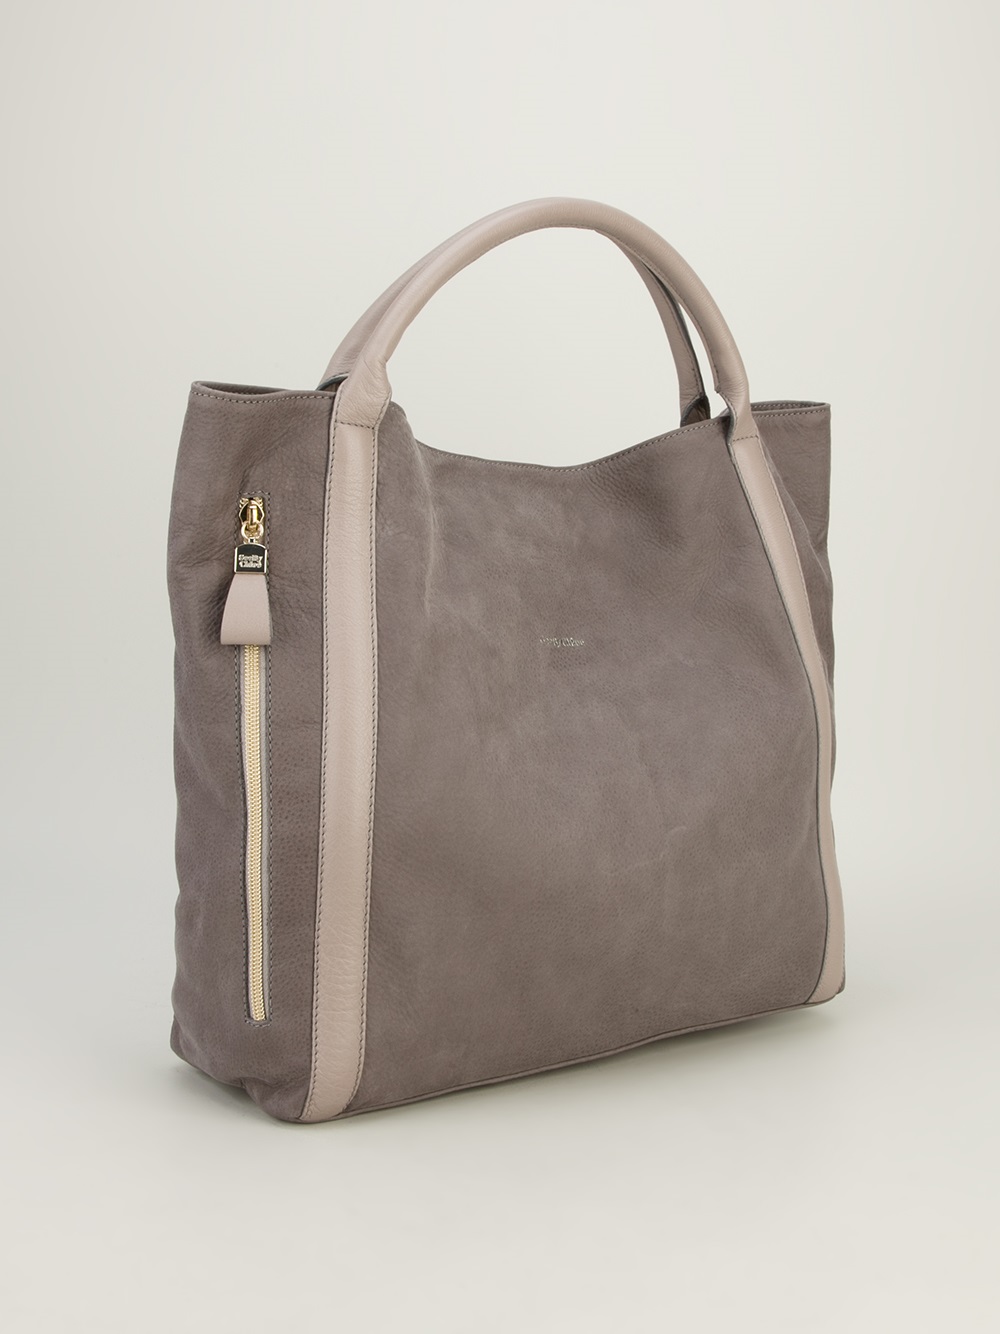 Lyst - See By Chloé Tote Bag in Gray